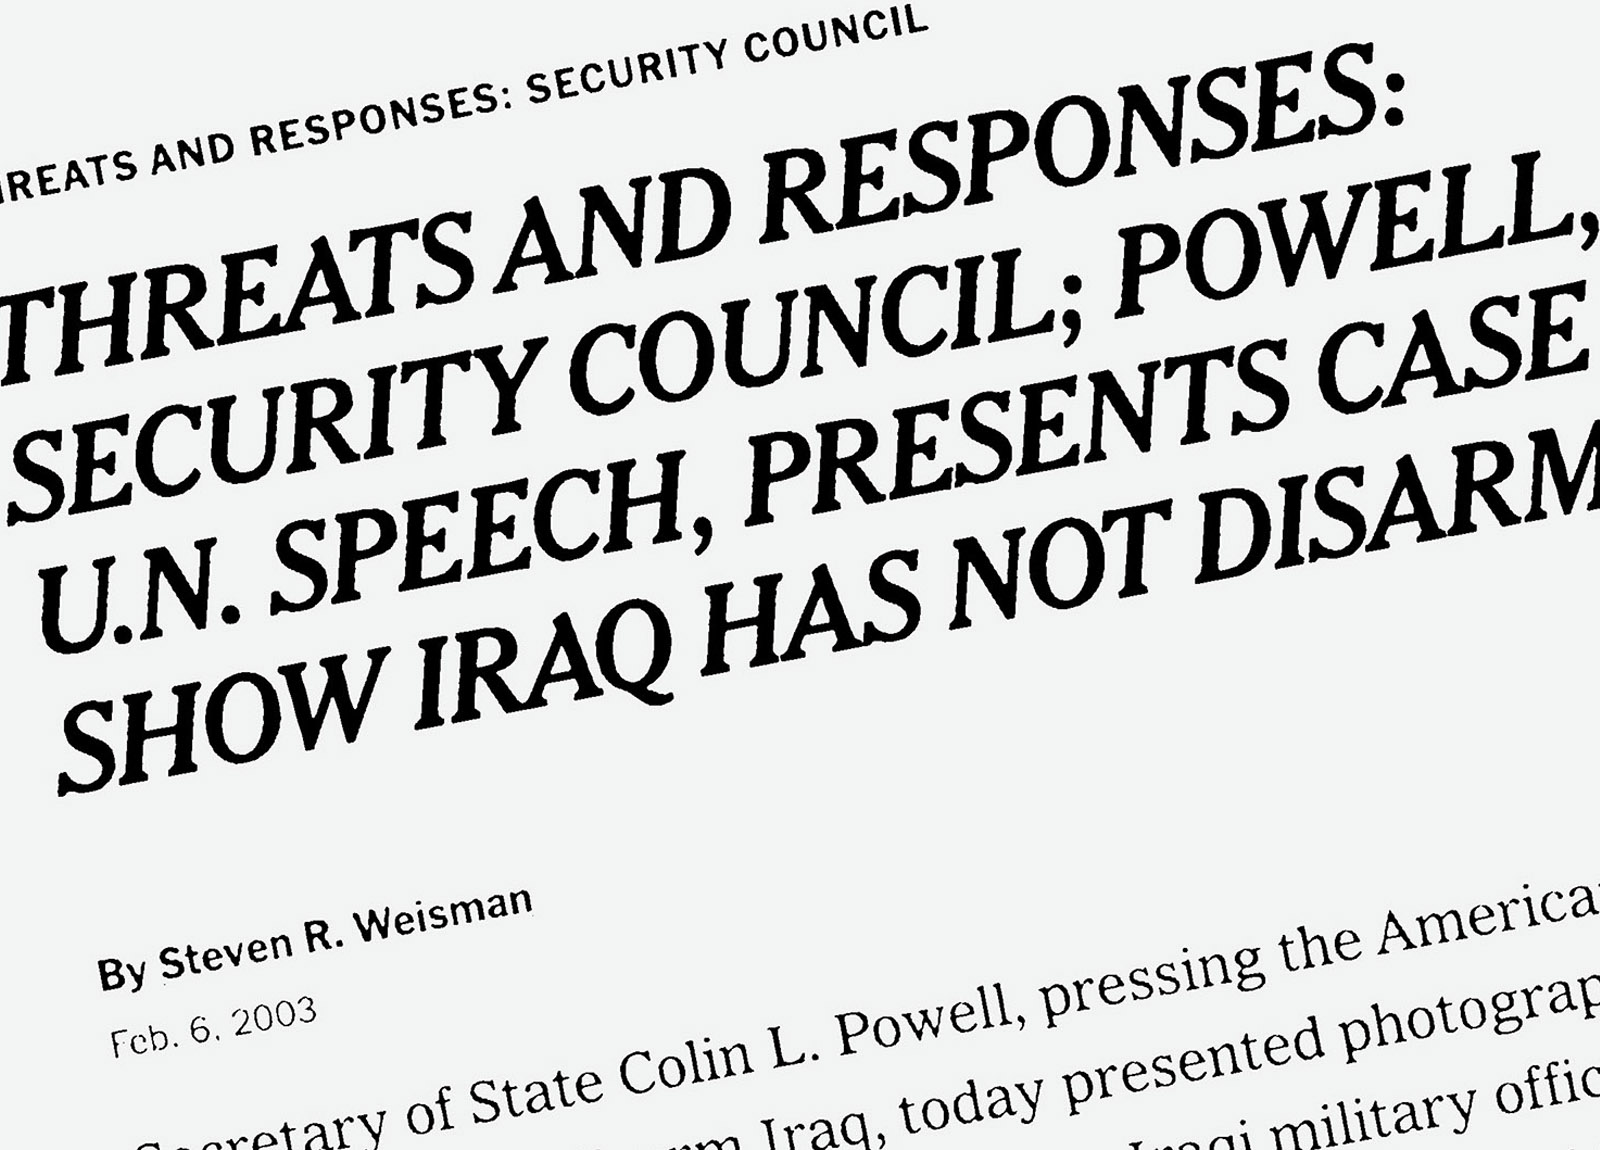 Illustration:
A New York Times headline, taken from its website, is blown up so that it extends beyond the edges. The headline reads: “Threats and Responses: Security Council; Powell, U.N. Speech, Presents Cases that Show Iraq Has Not Disarmed.